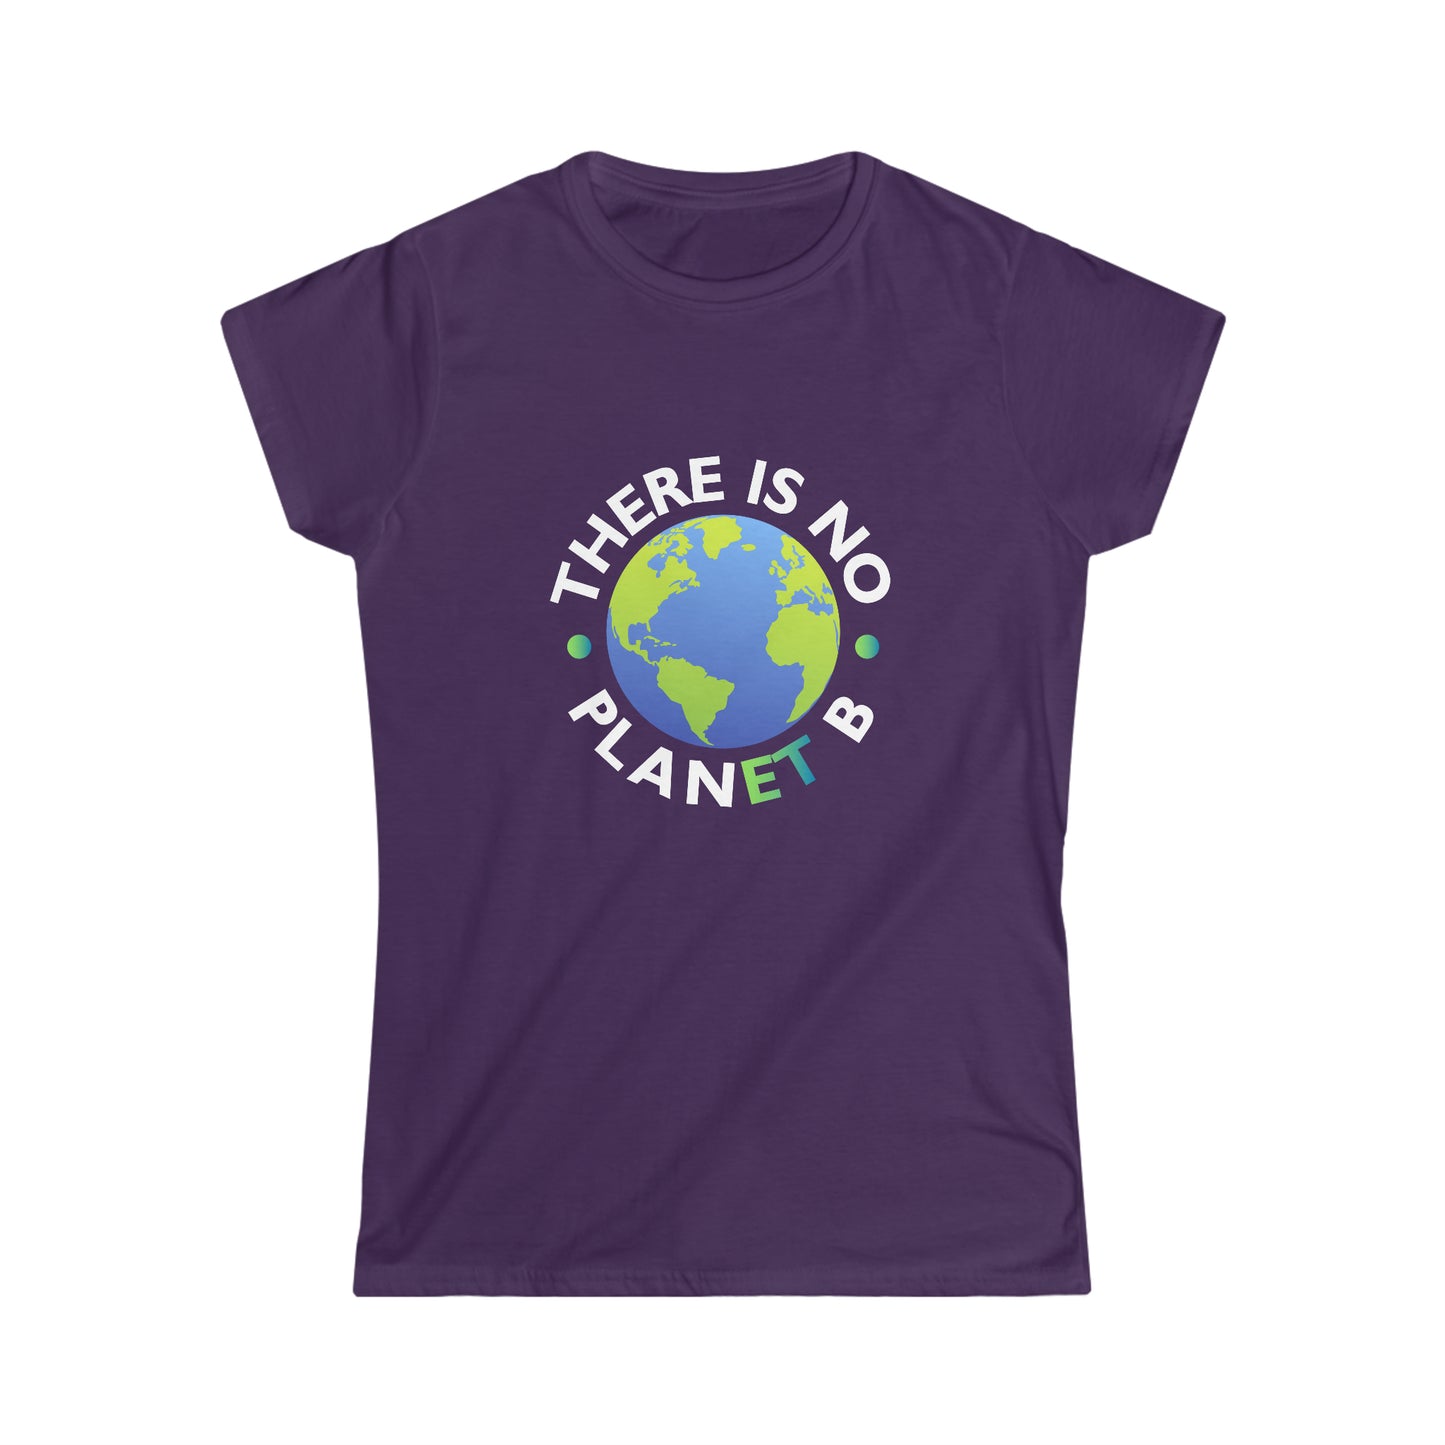 “There Is No Planet B” Women’s T-Shirts